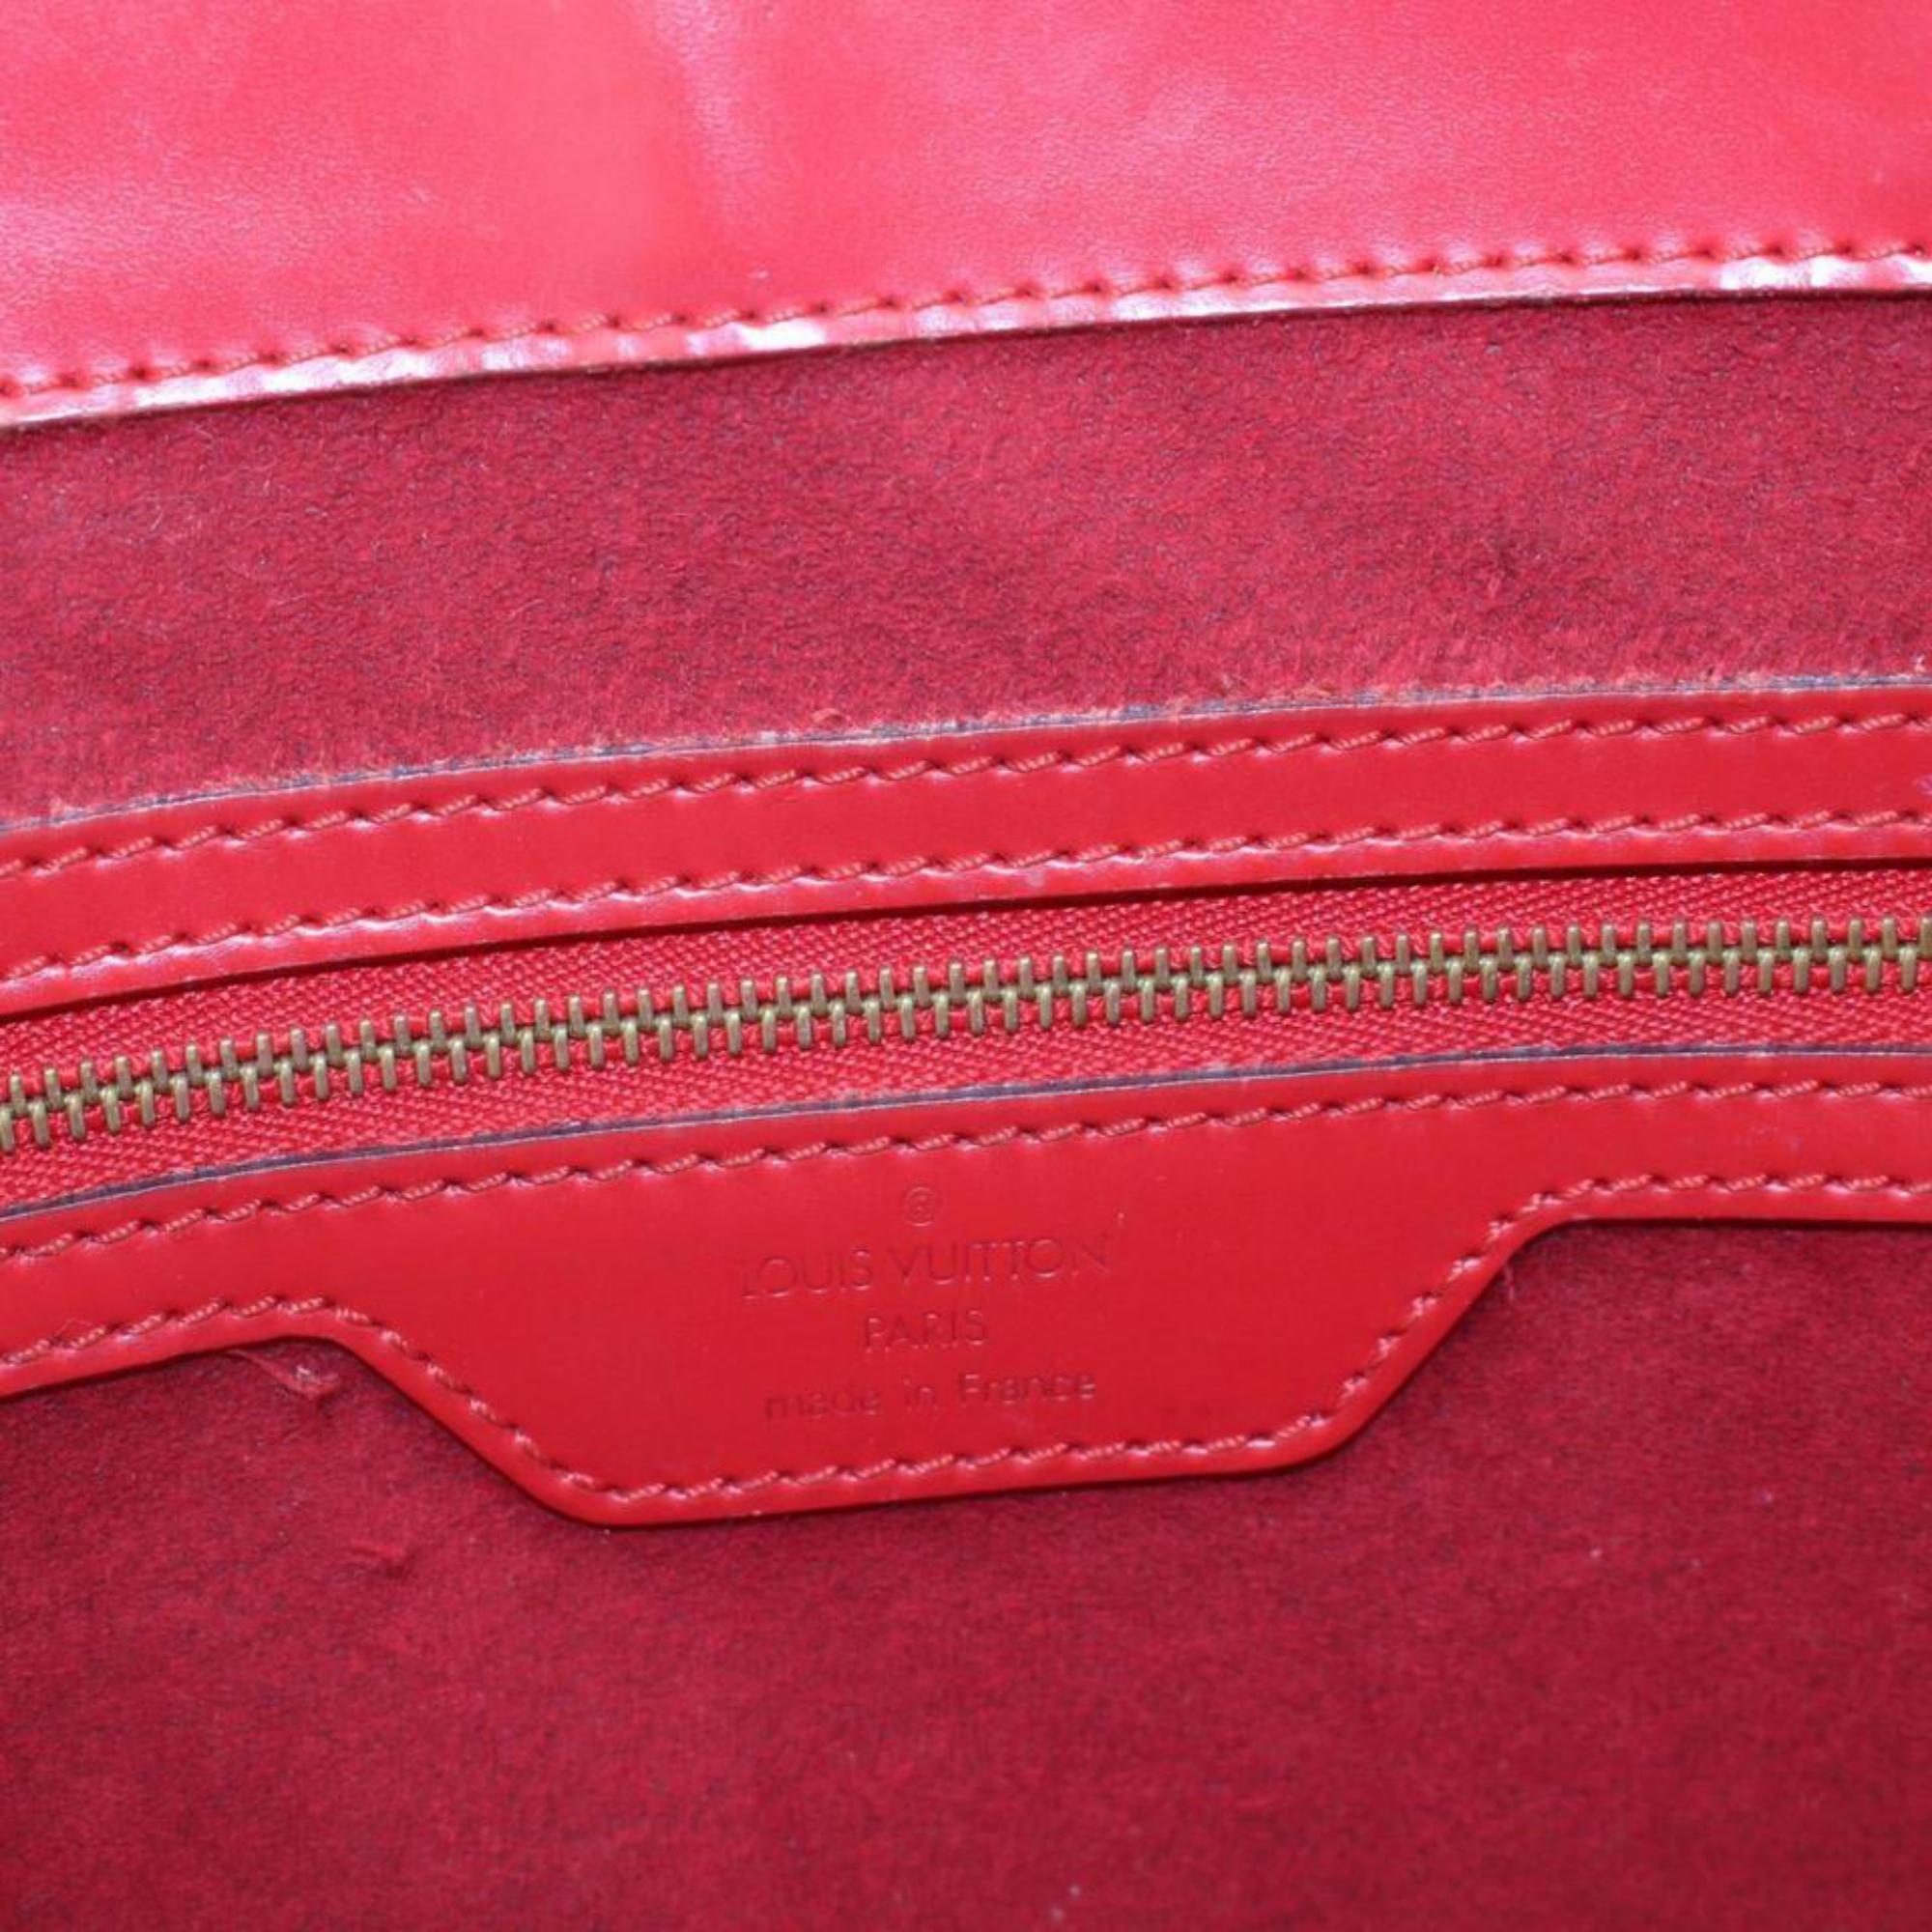 Louis Vuitton Epi Castillian Duplex Tote 869545 Red Leather Shoulder Bag In Good Condition For Sale In Forest Hills, NY